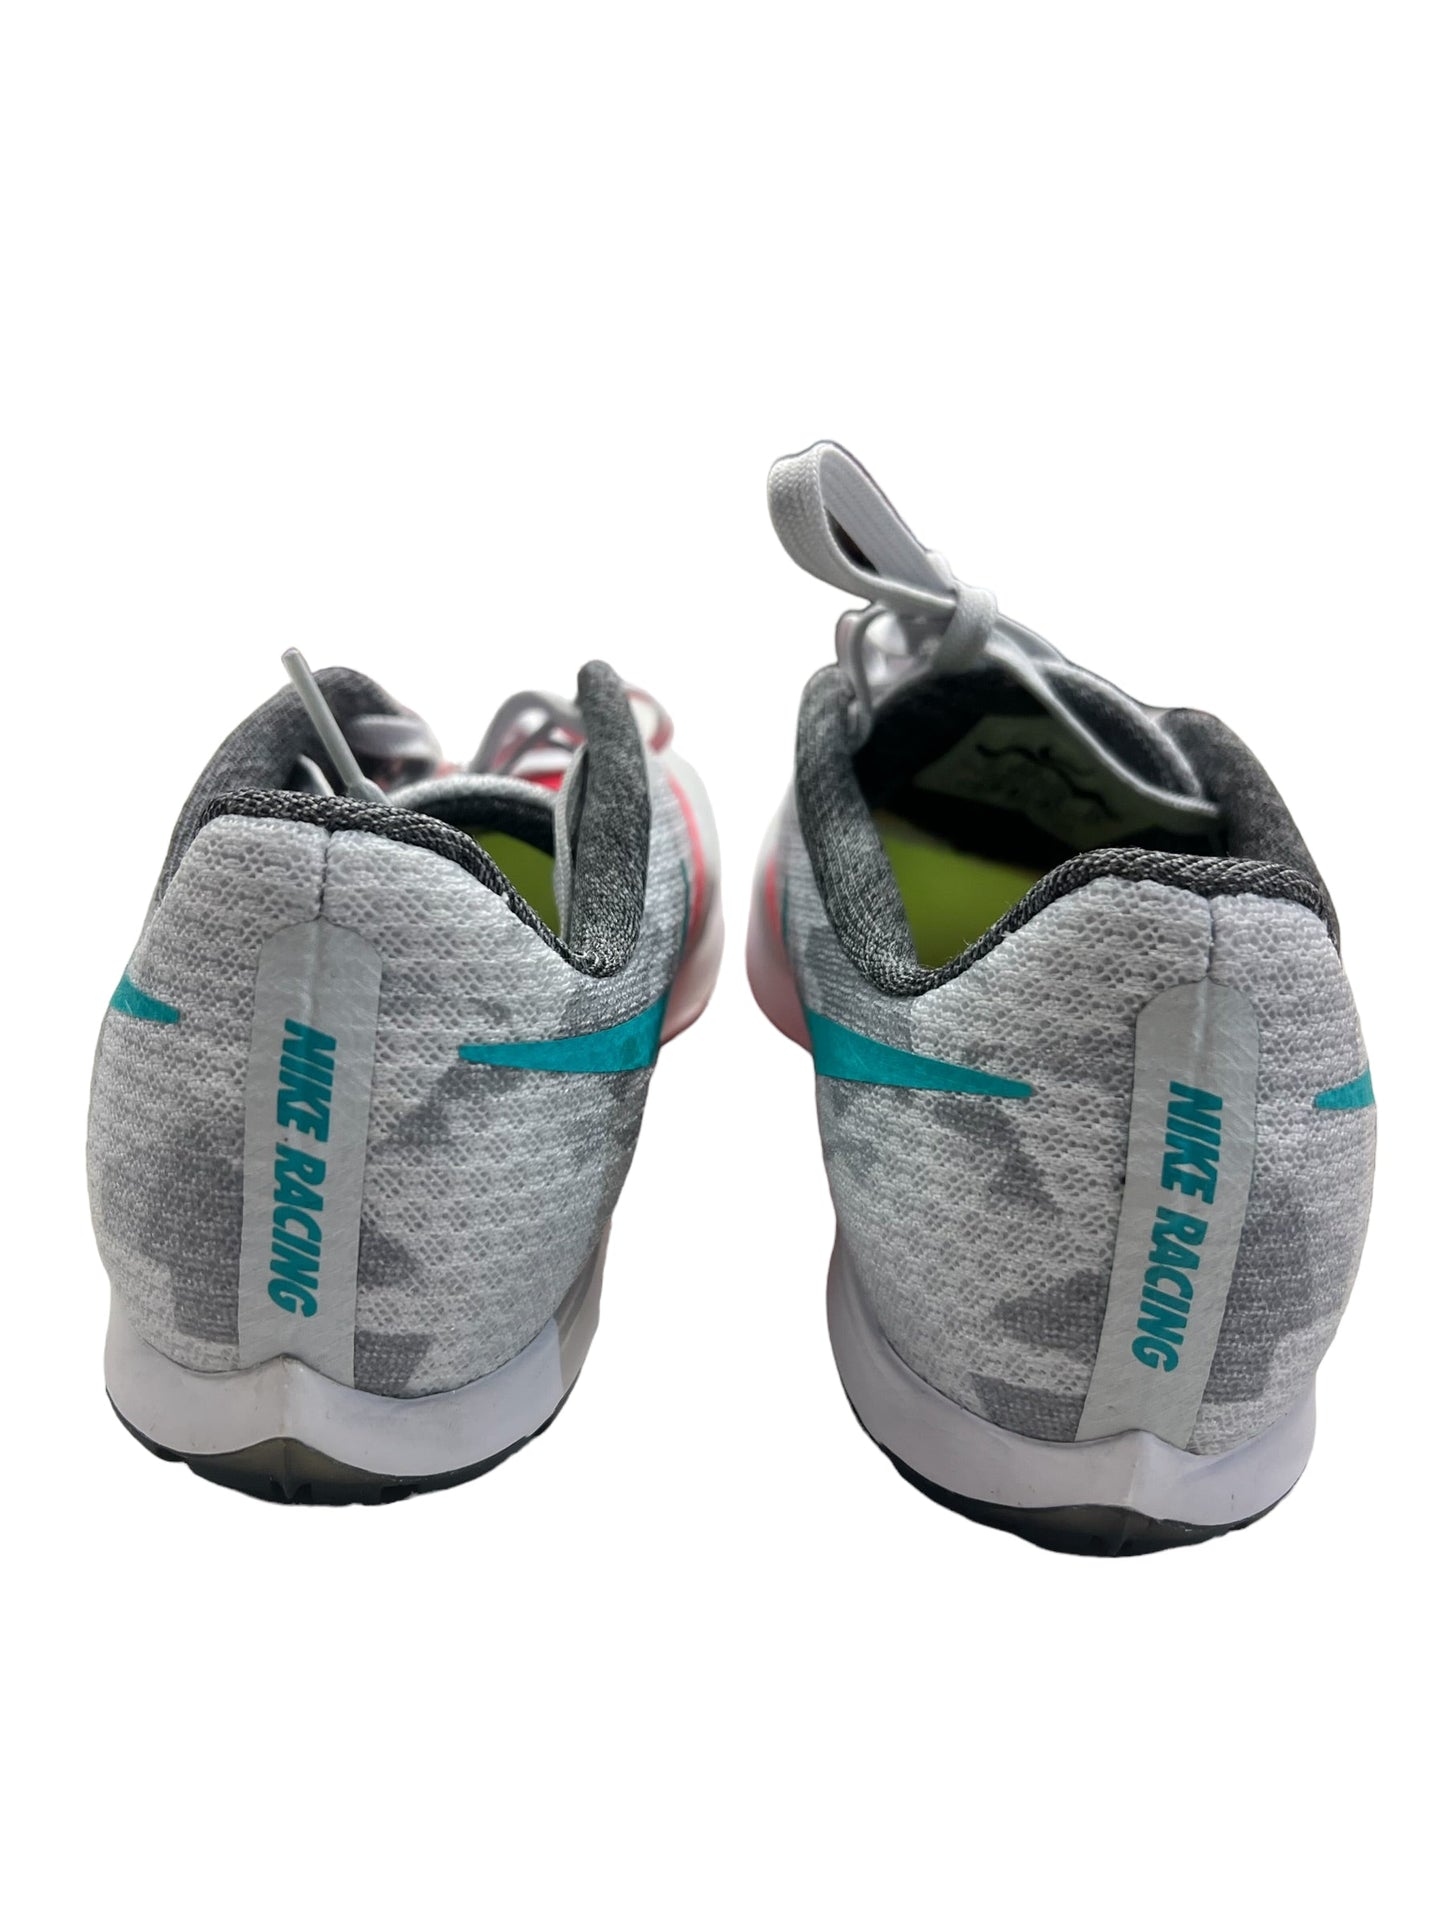 Shoes Athletic By Nike RACING SHOES Size: 8